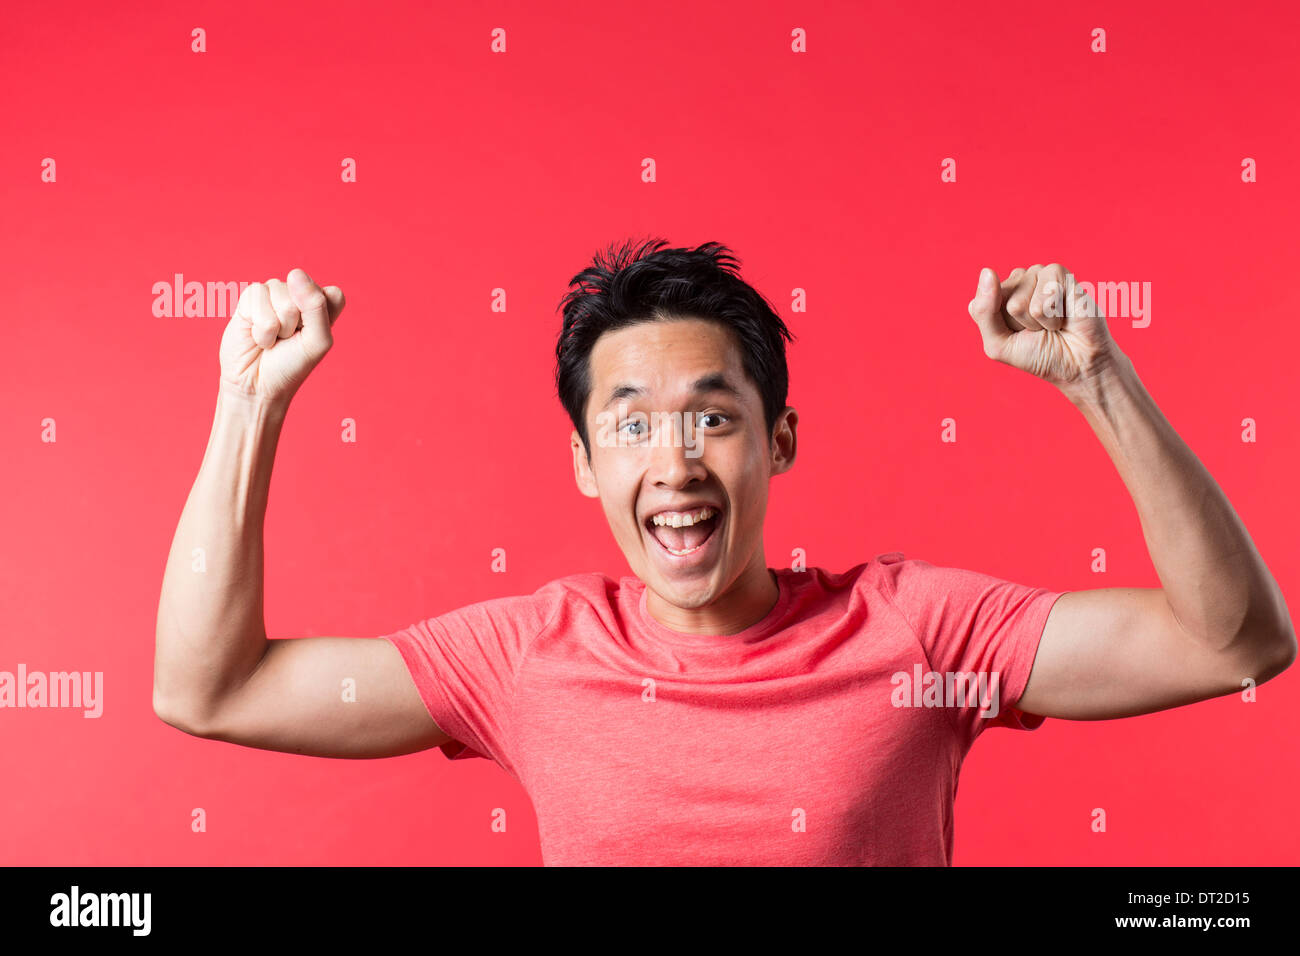 Cheerful Asian man celebrating with his arm up. In front of Red background Stock Photo